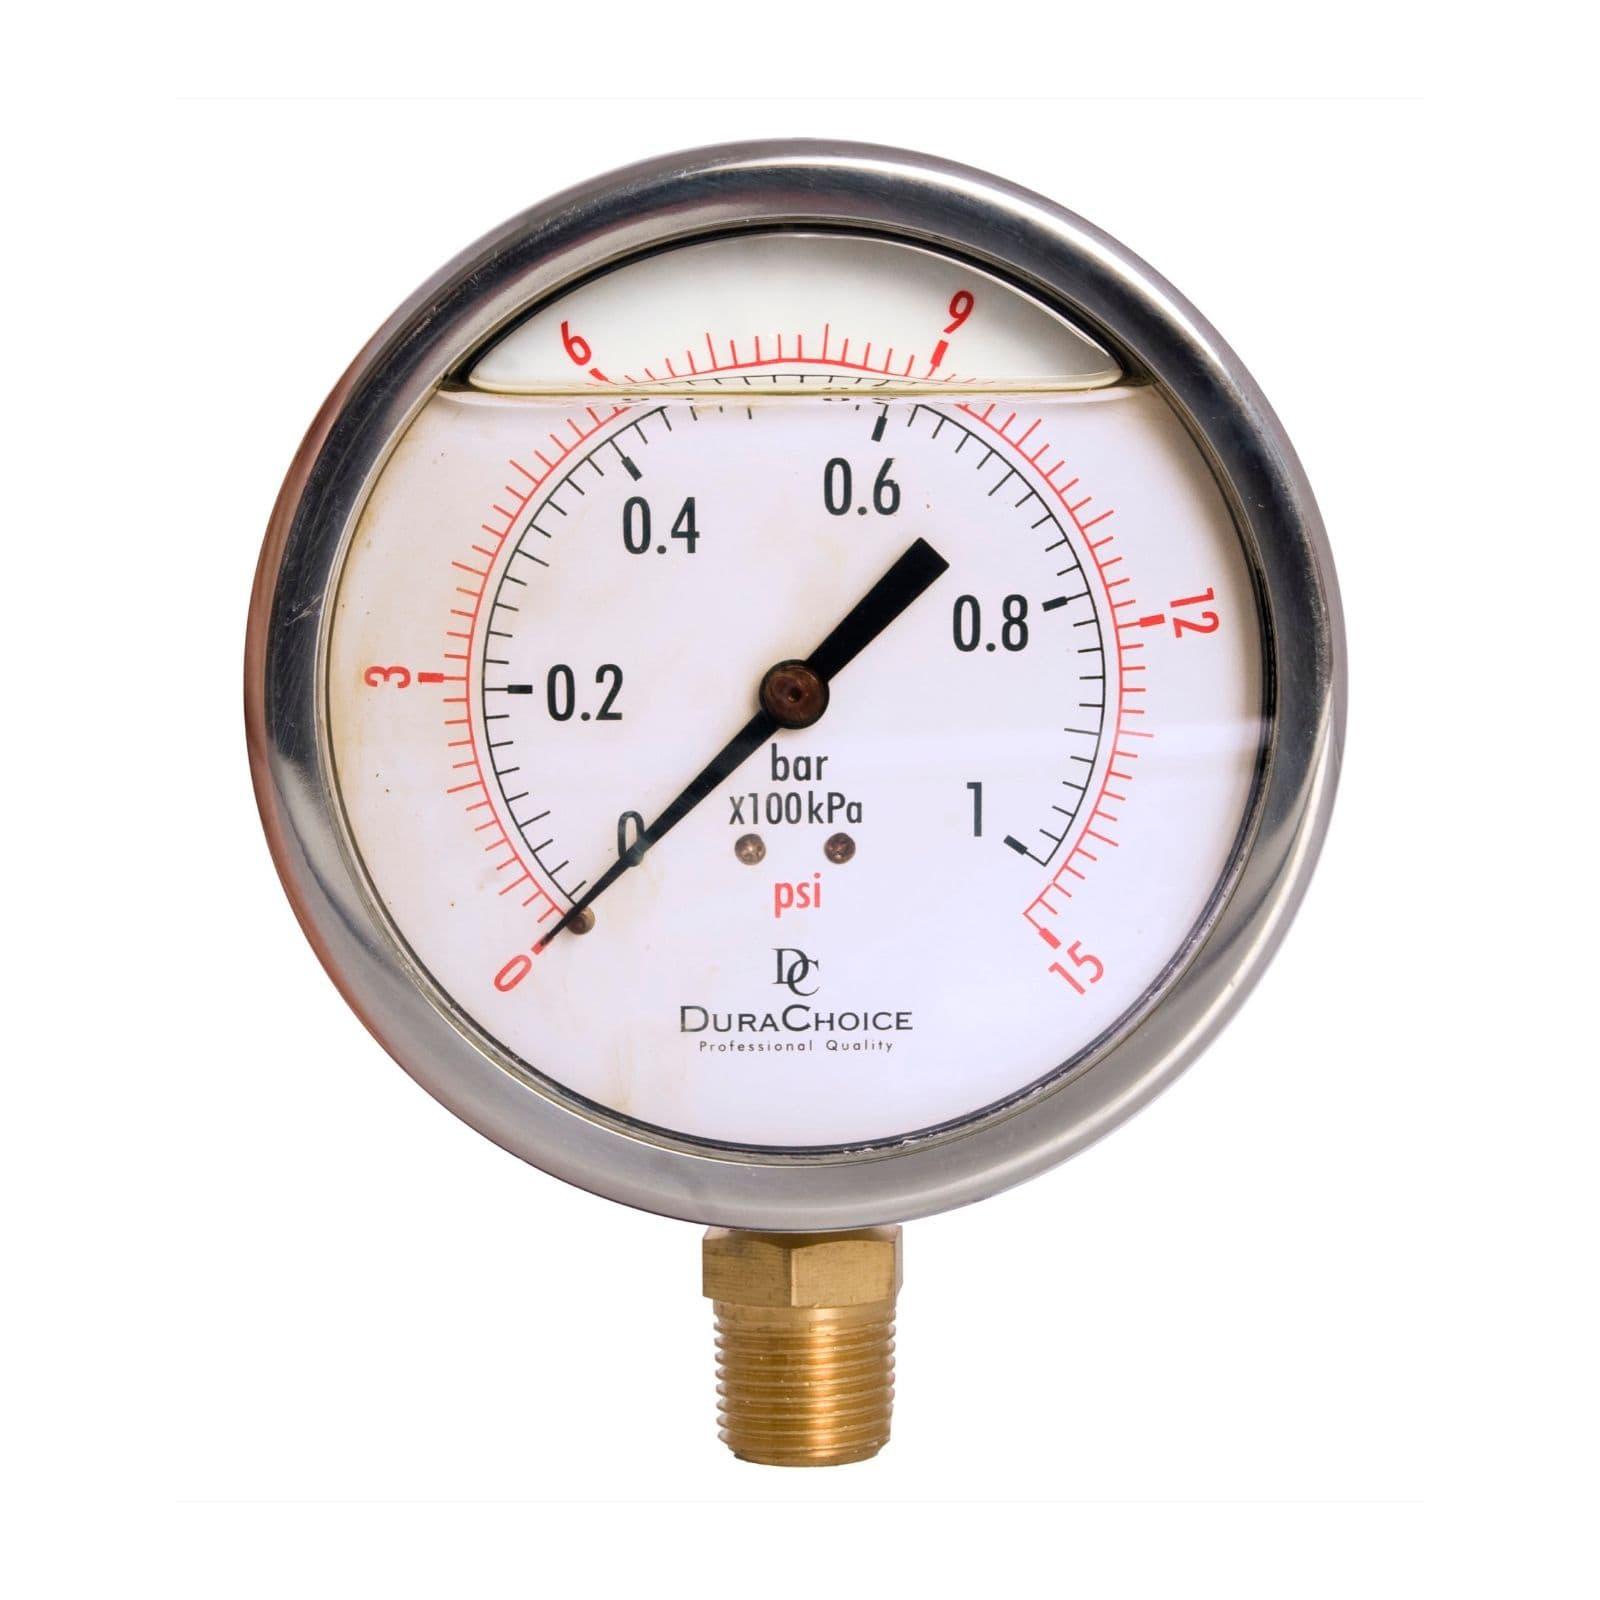 0//2000 psi Range 1//2 Male NPT Connection Size and Laminated Safety Glass Lens 1//2 Male NPT Connection Size PIC Gauge 4001-2LO 4 Dial Bottom Mount Dry Process Pressure Gauge with a Stainless Steel Case and Internals Removable Stainless Steel Bezel